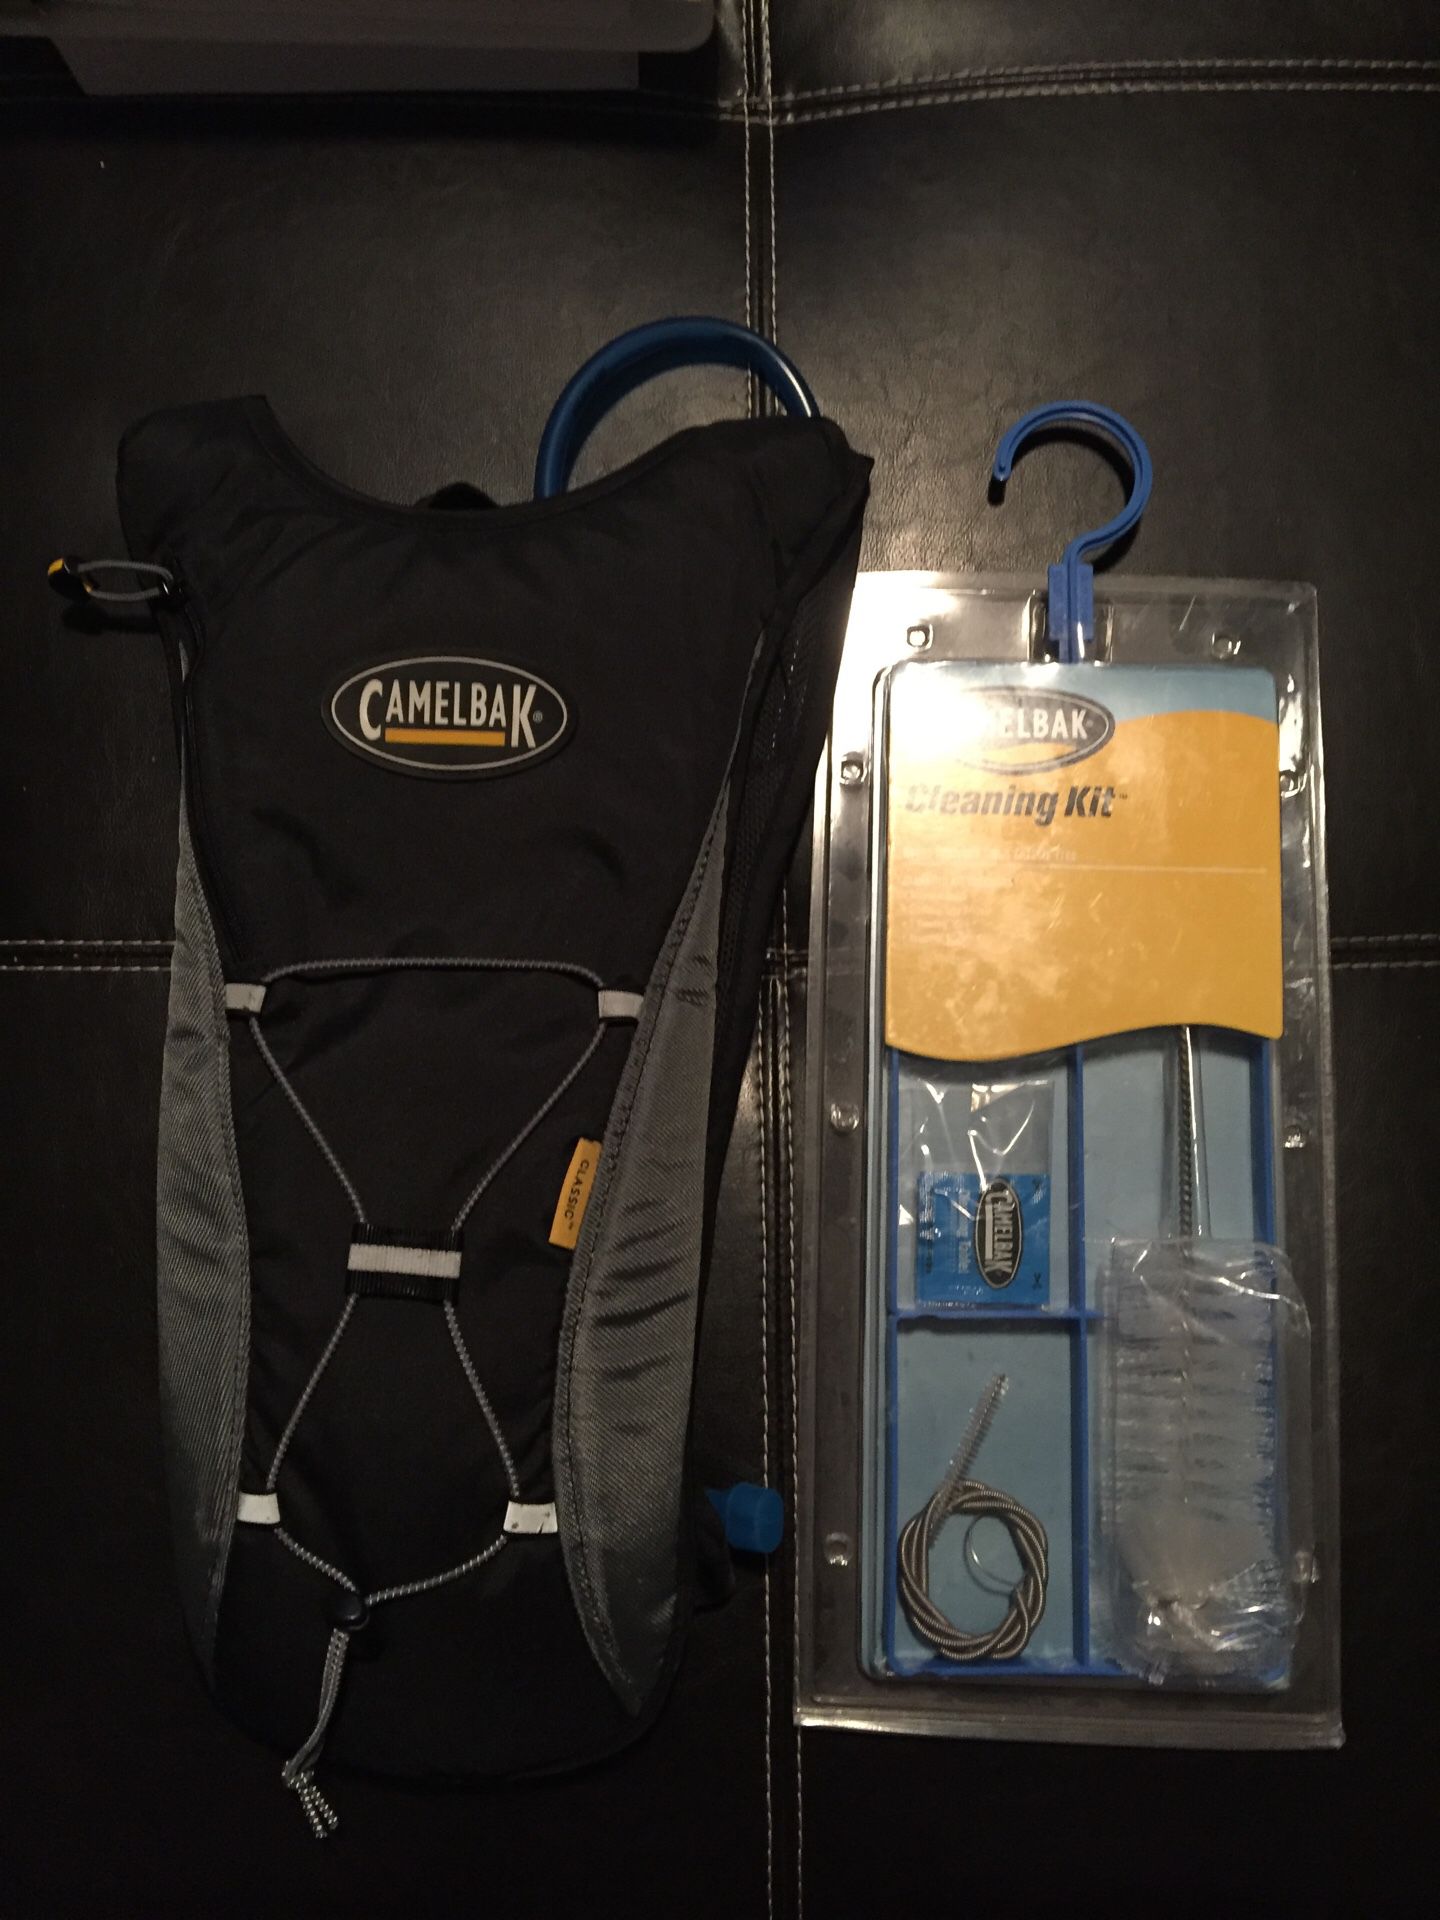 Classic Camelback and Cleaning Kit